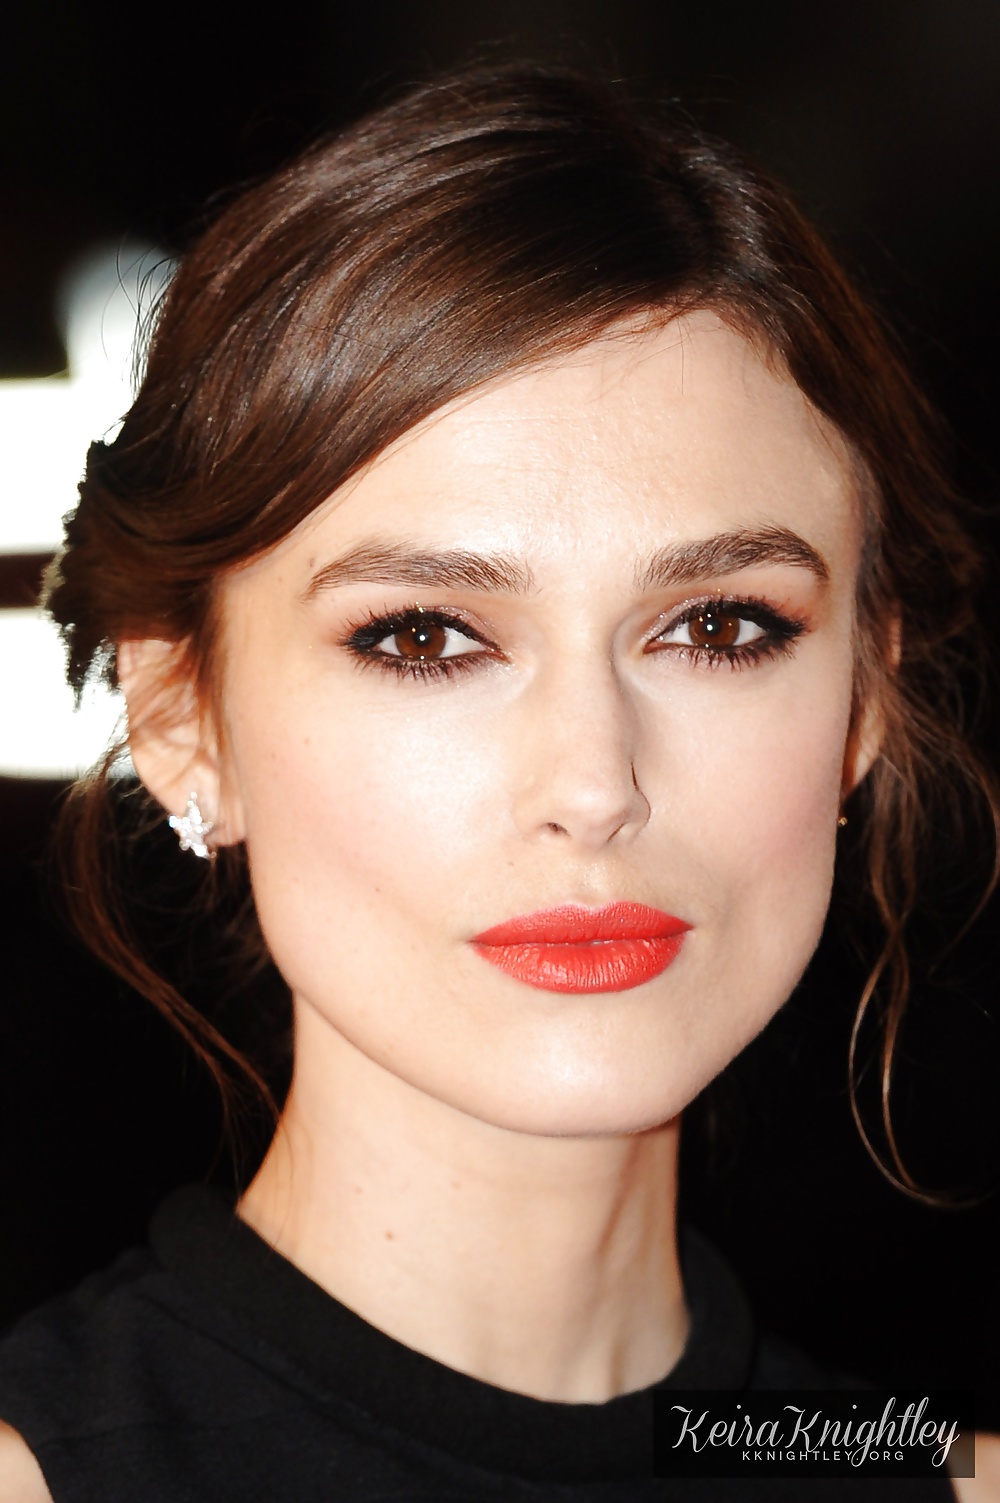 Keira Knightley The Royal Lady of England #35649743